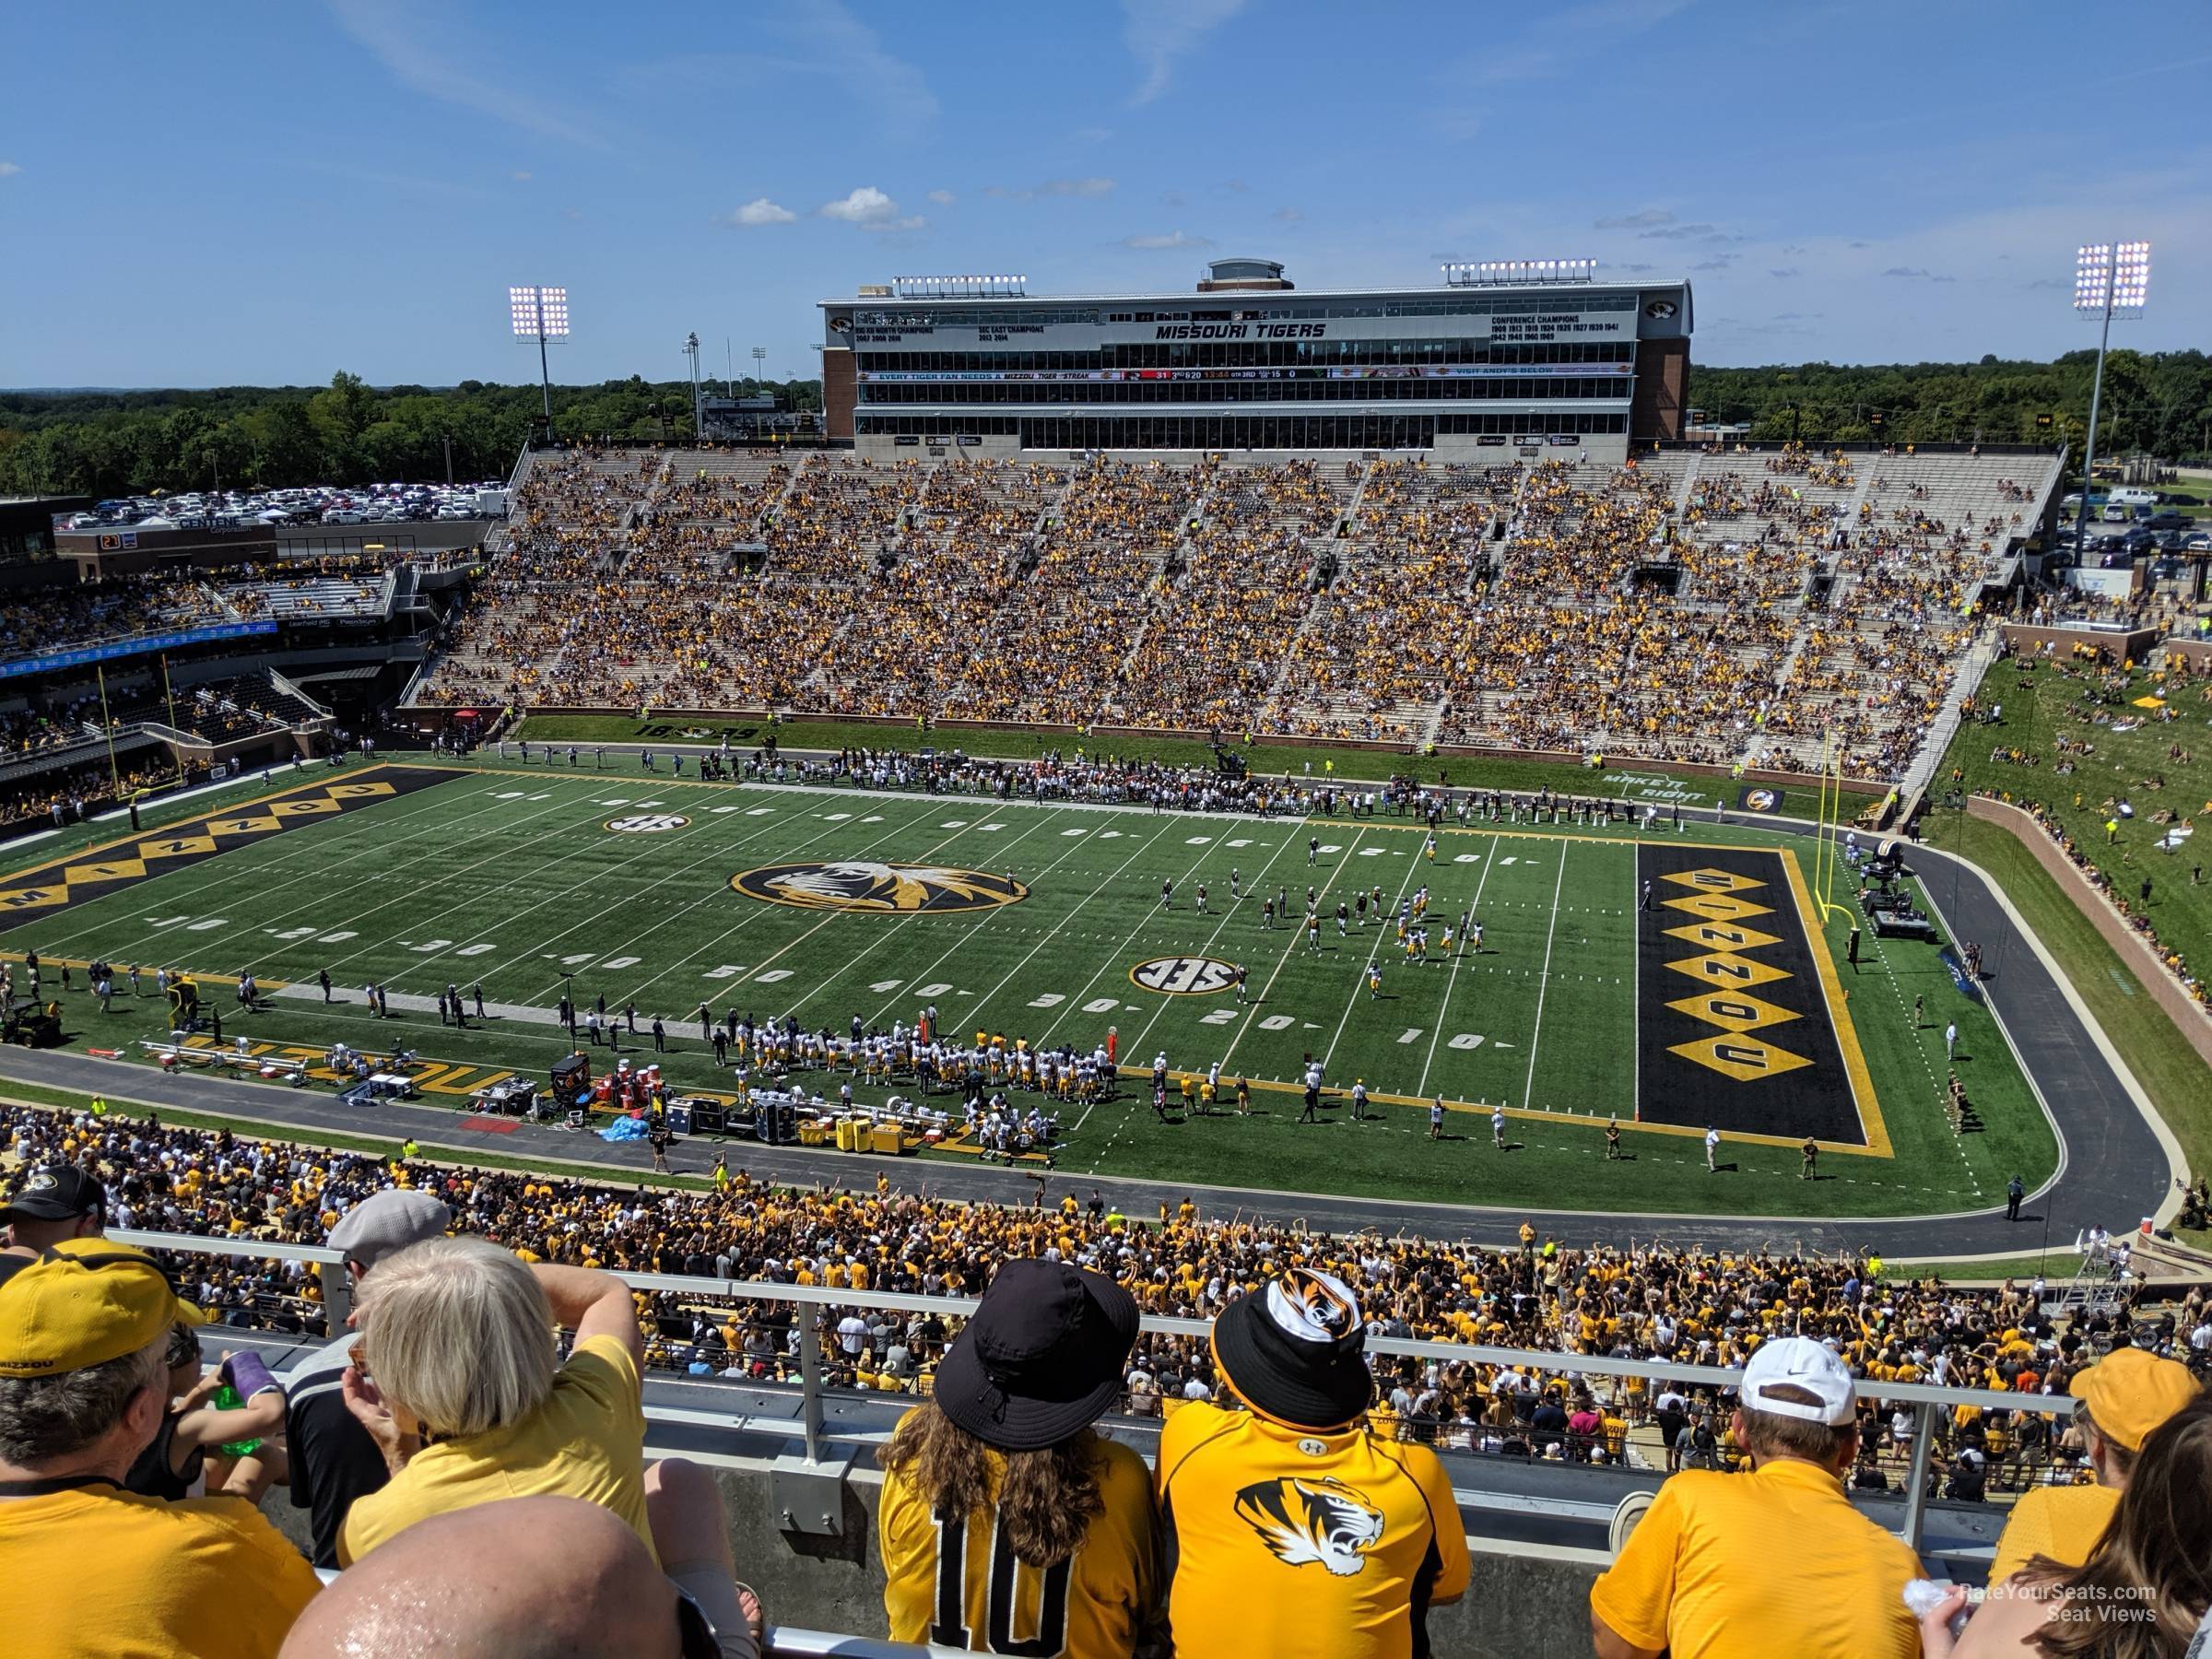 section 312, row 4 seat view  - faurot field